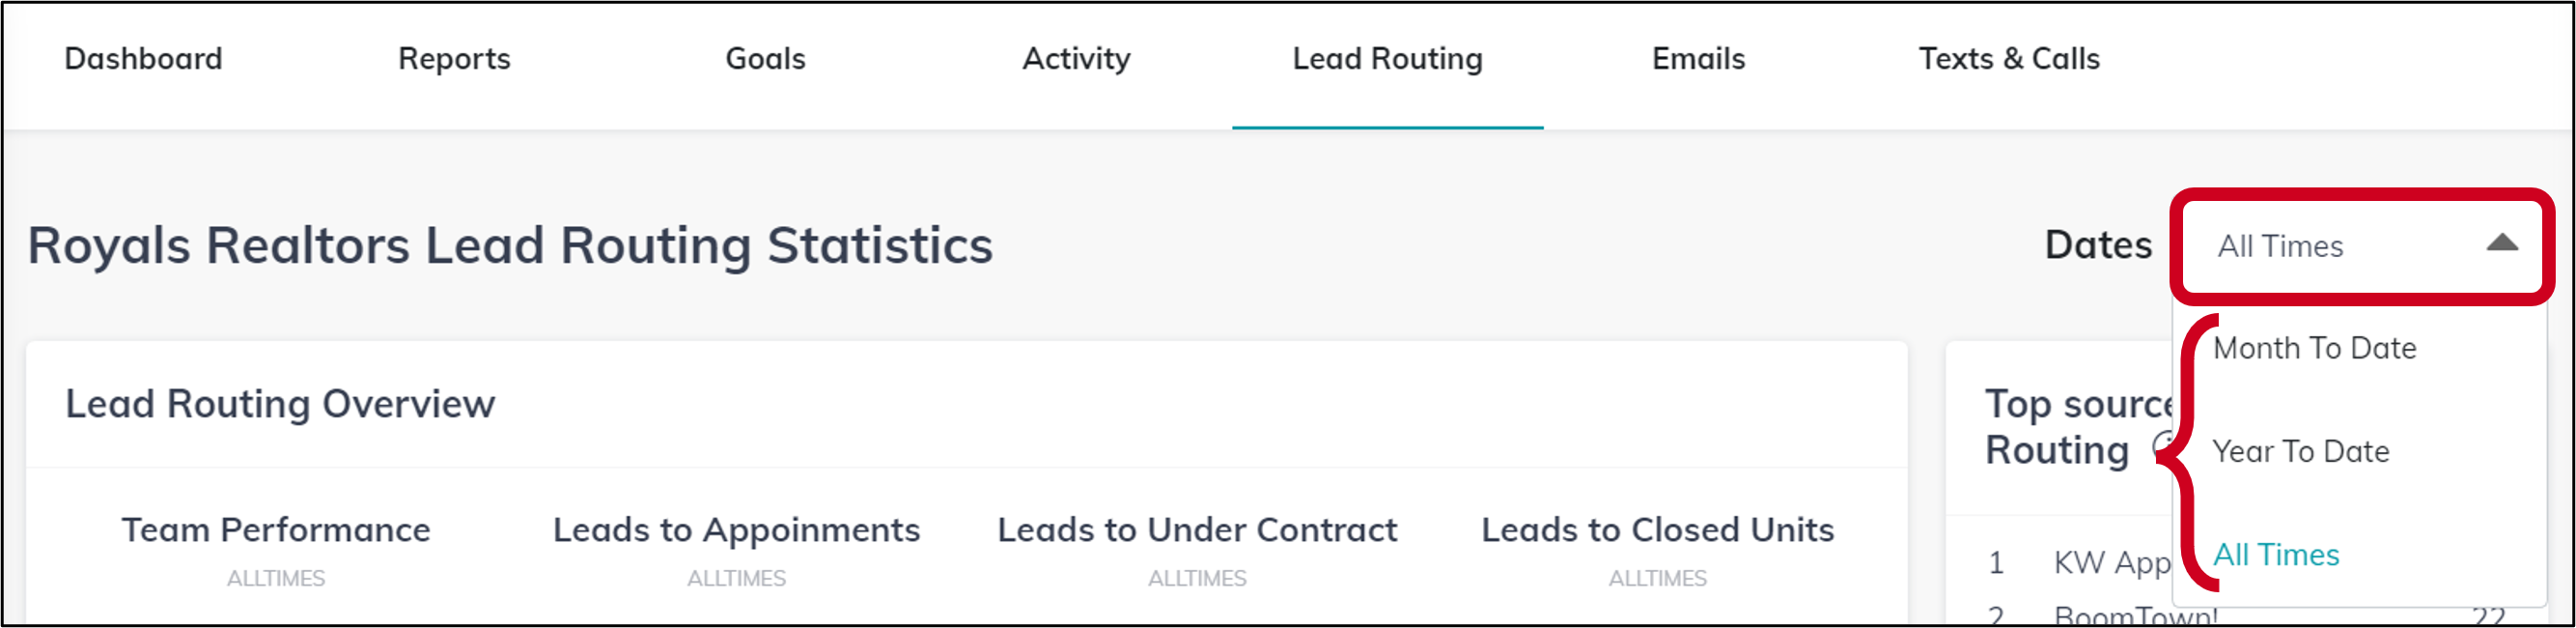 teams_reports_lead_routing_date_filter.png